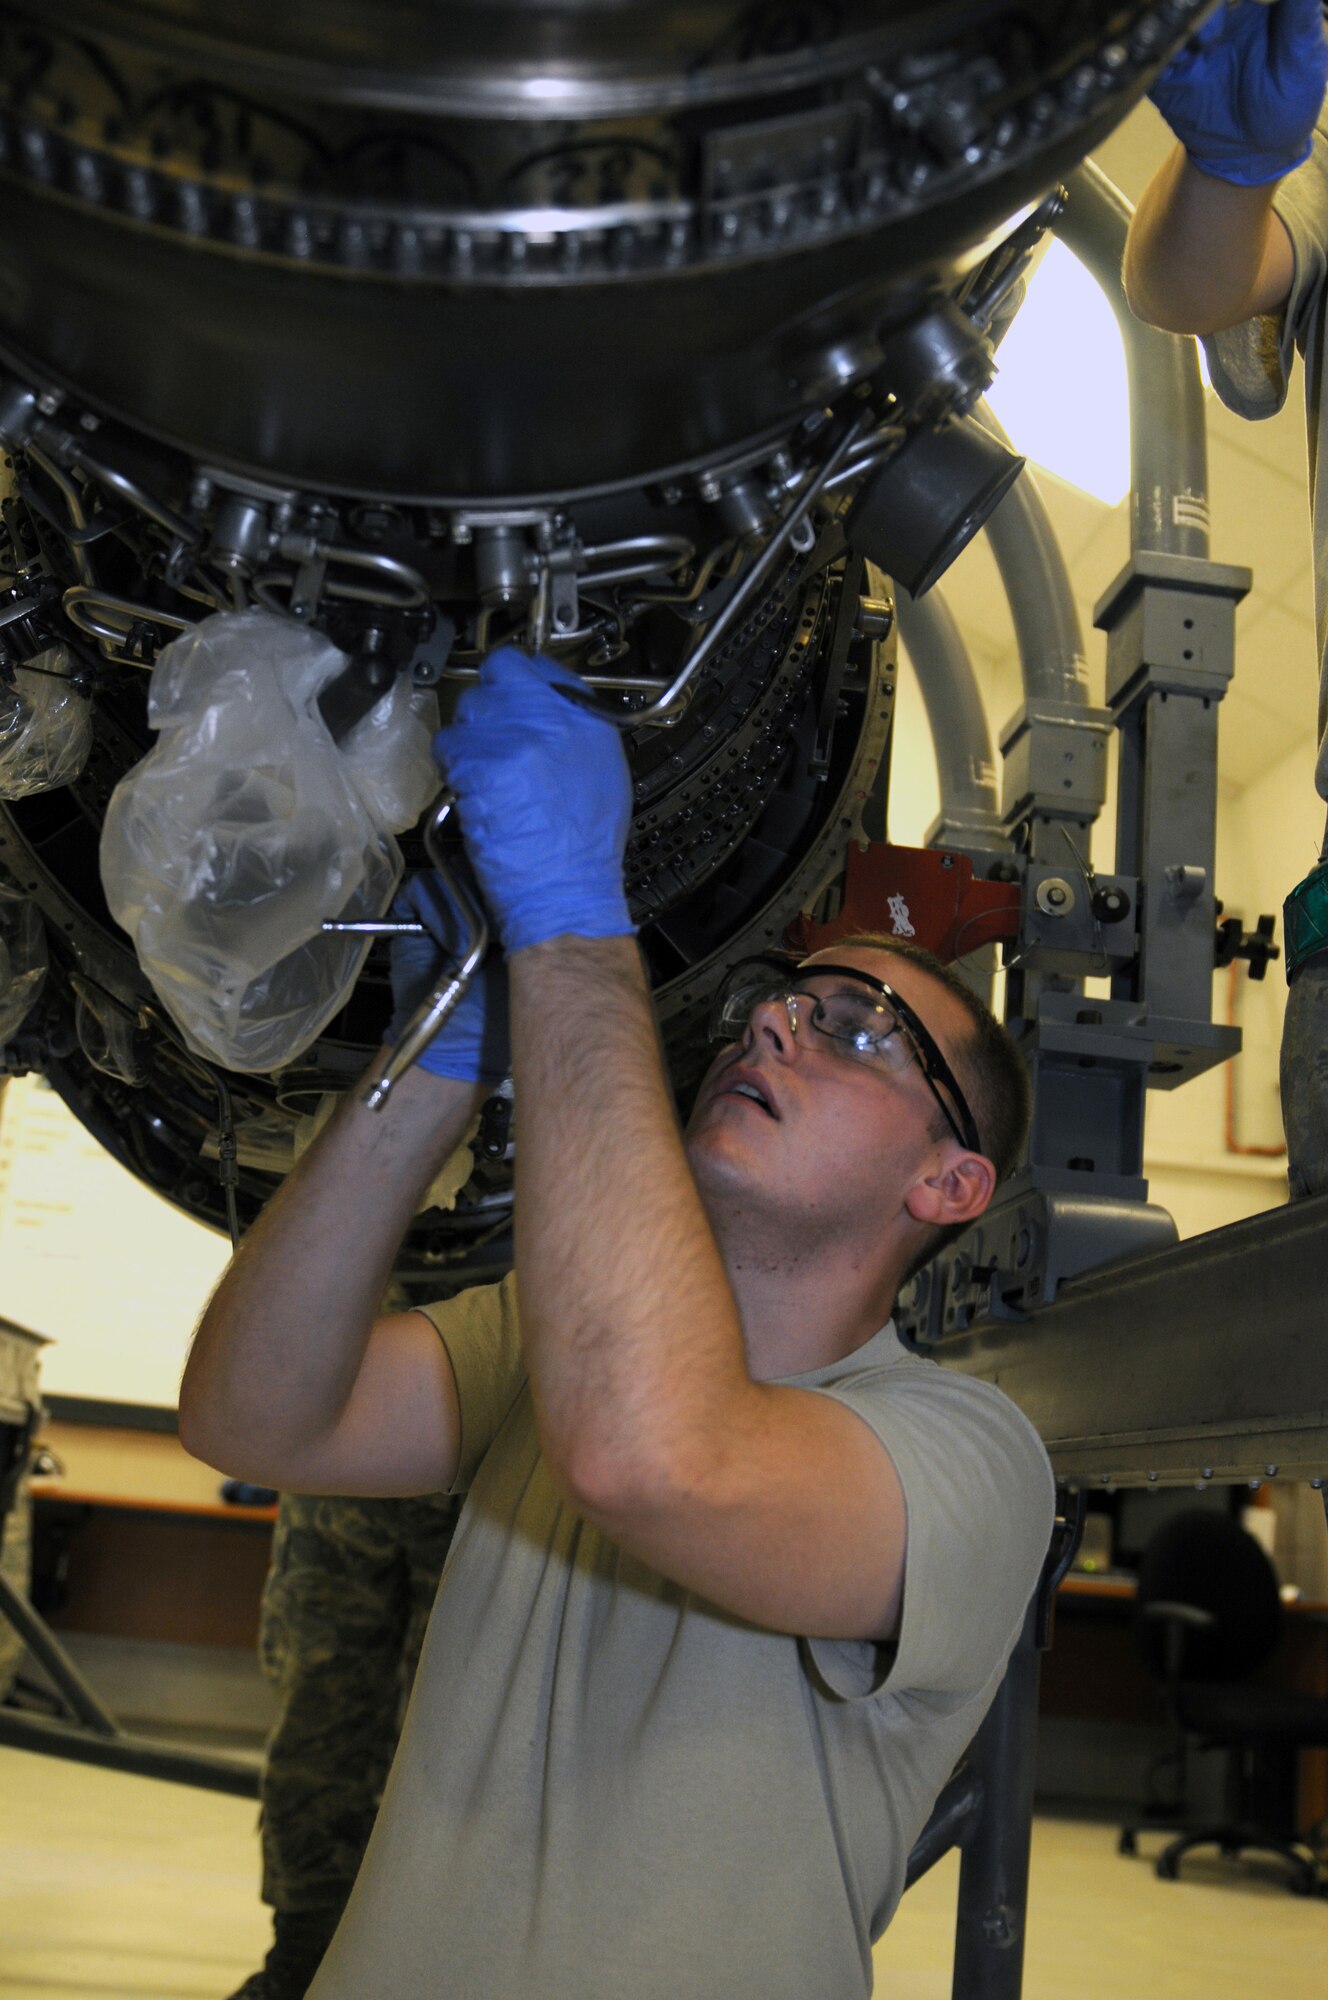 ROYAL AIR FORCE LAKENHEATH, England - Senior Airman Christopher Conley, 48th Component Maintenance Squadron aerospace propulsion journeyman, practice repairs on an aircraft engine during a class held by the 372nd Squadron Training Detachment 16, at RAF Lakenheath, July 27, 2011. Detachment 16 offers more than 55 different courses to ensure all 48th Fighter Wing maintainers are qualified to repair and inspect assigned aircraft supporting the Liberty Wing mission of worldwide responsive combat air power and support. (U.S. Air Force photo/Airman Cory Payne)